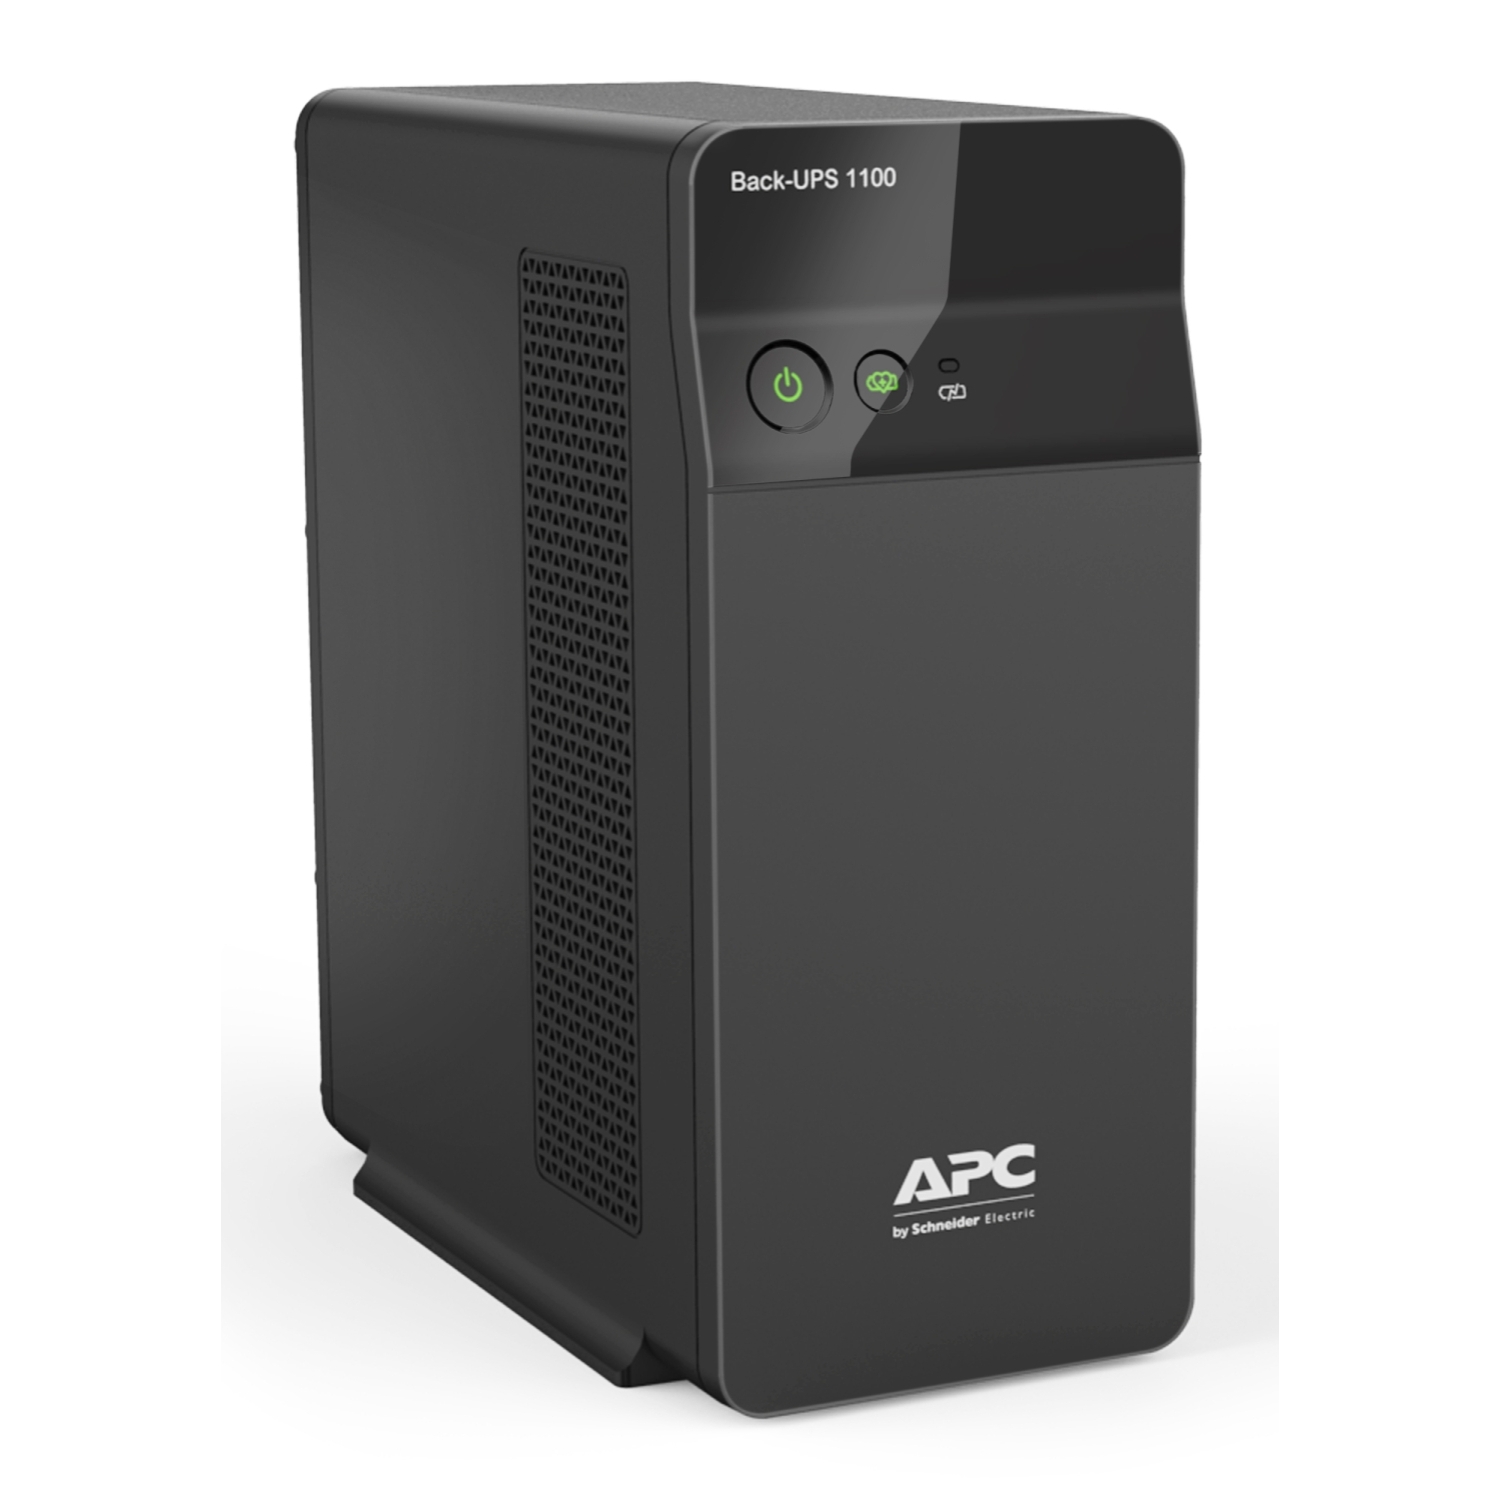 APC Back-UPS 1100VA, 230V, without auto shutdown software, 5 India outlets  (1 surge) - BX1100C-IN